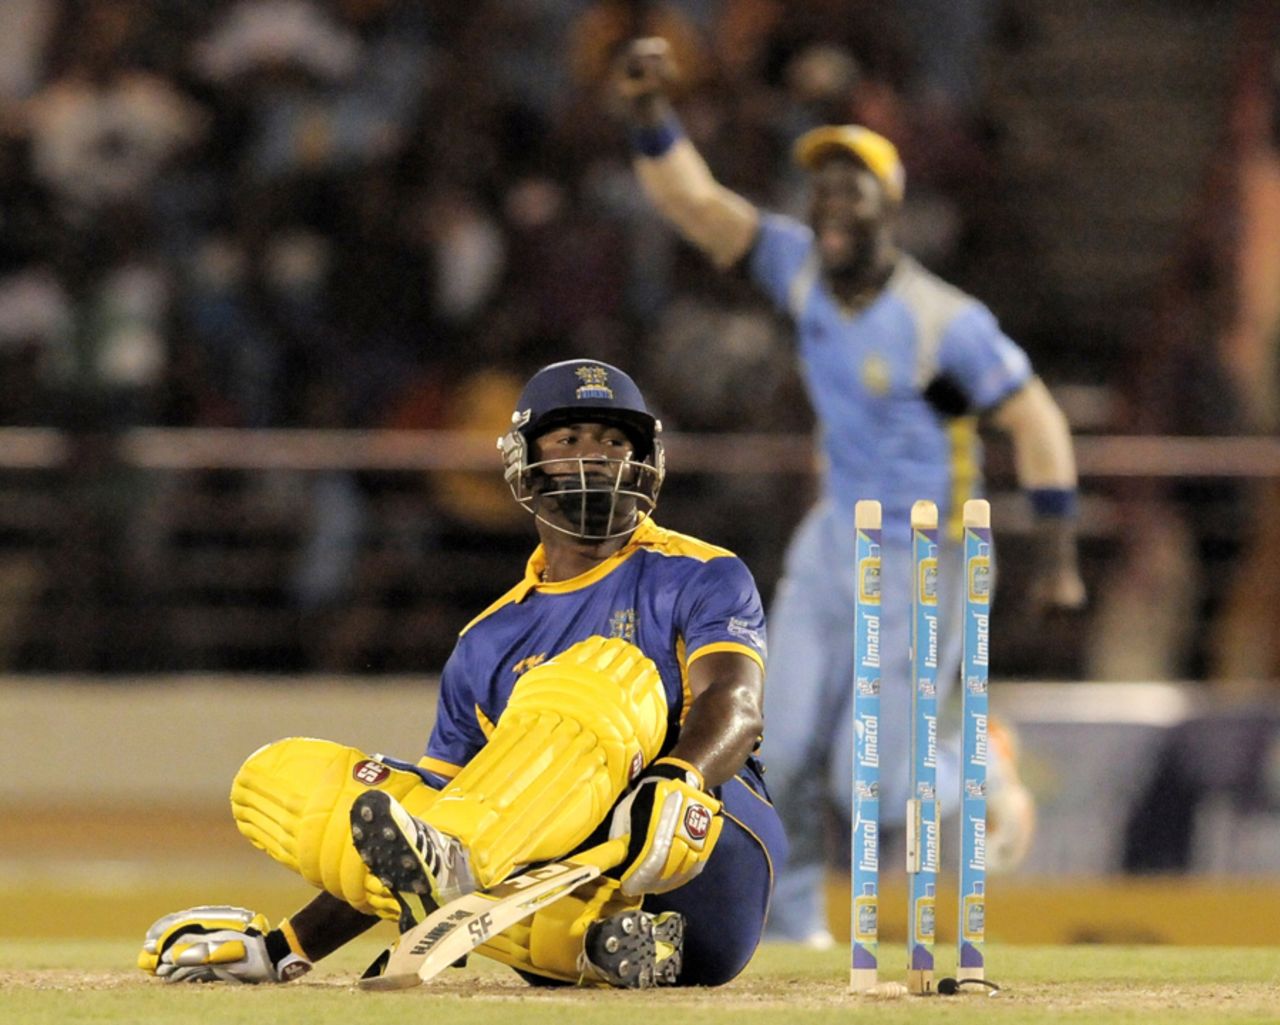 Dwayne Smith was bowled for 48, St Lucia Zouks v Barbados Tridents, Caribbean Premier League, St Lucia, August 8, 2013